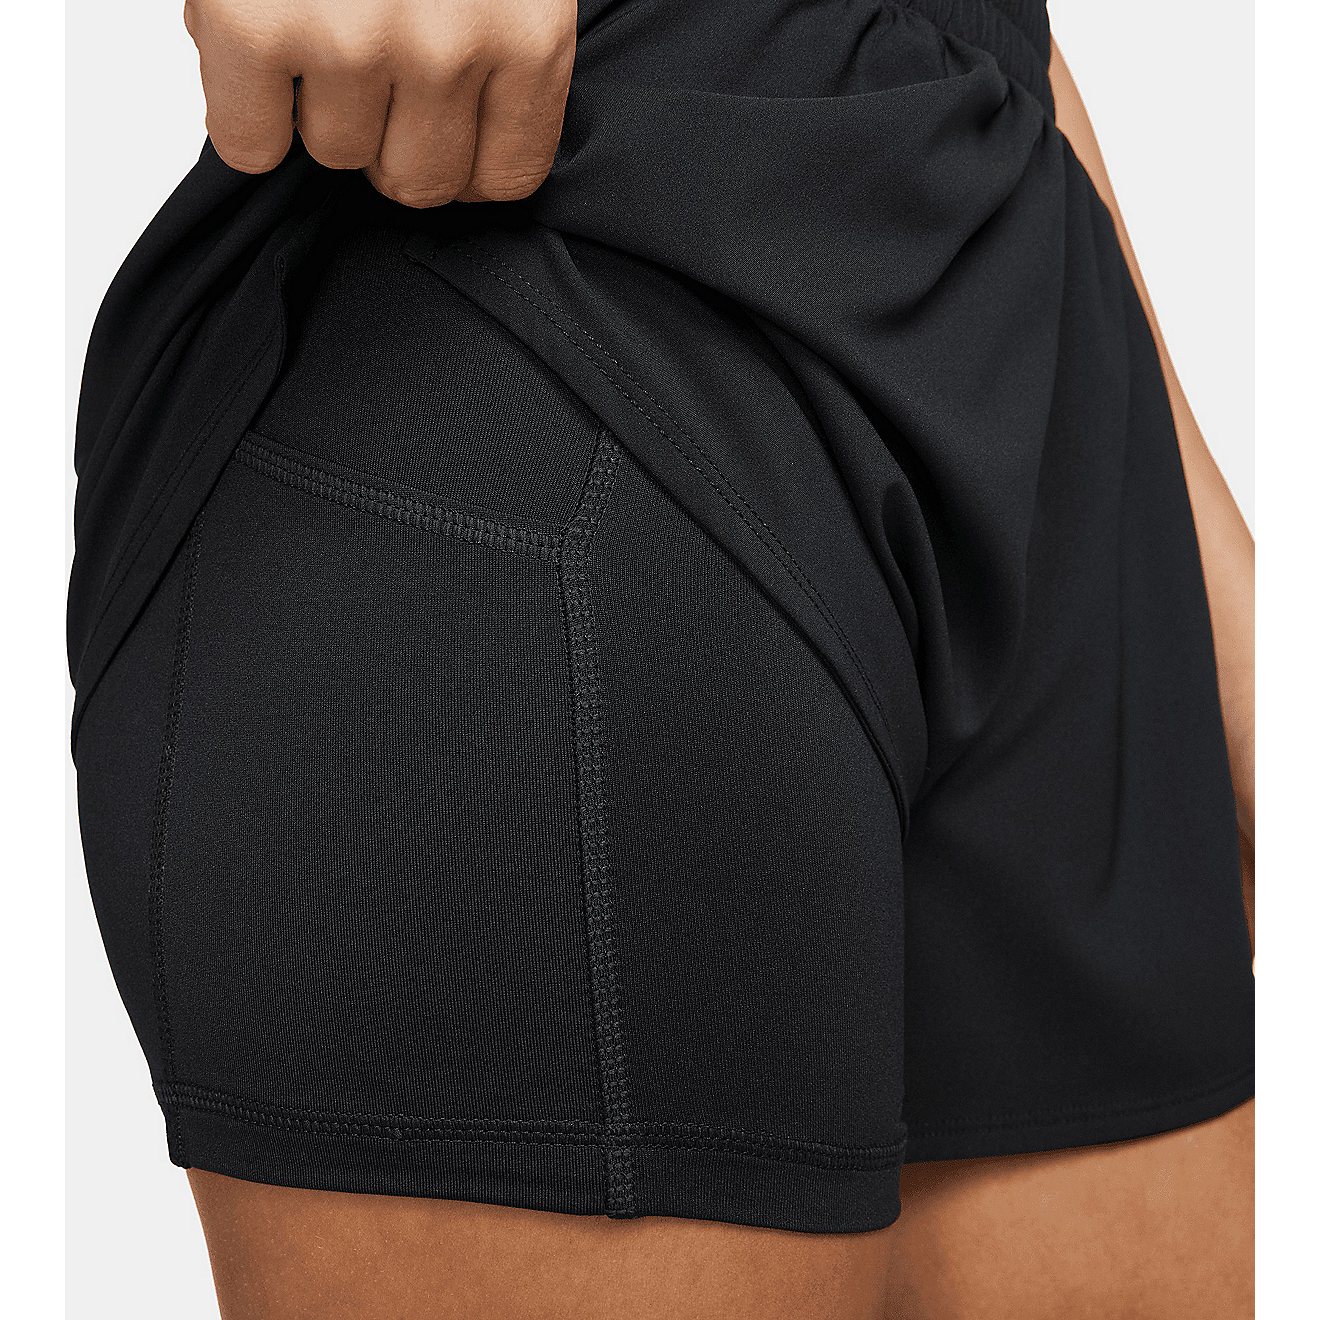 Nike Women's Dri-FIT One High-Rise 2-in-1 Shorts 3 in | Academy